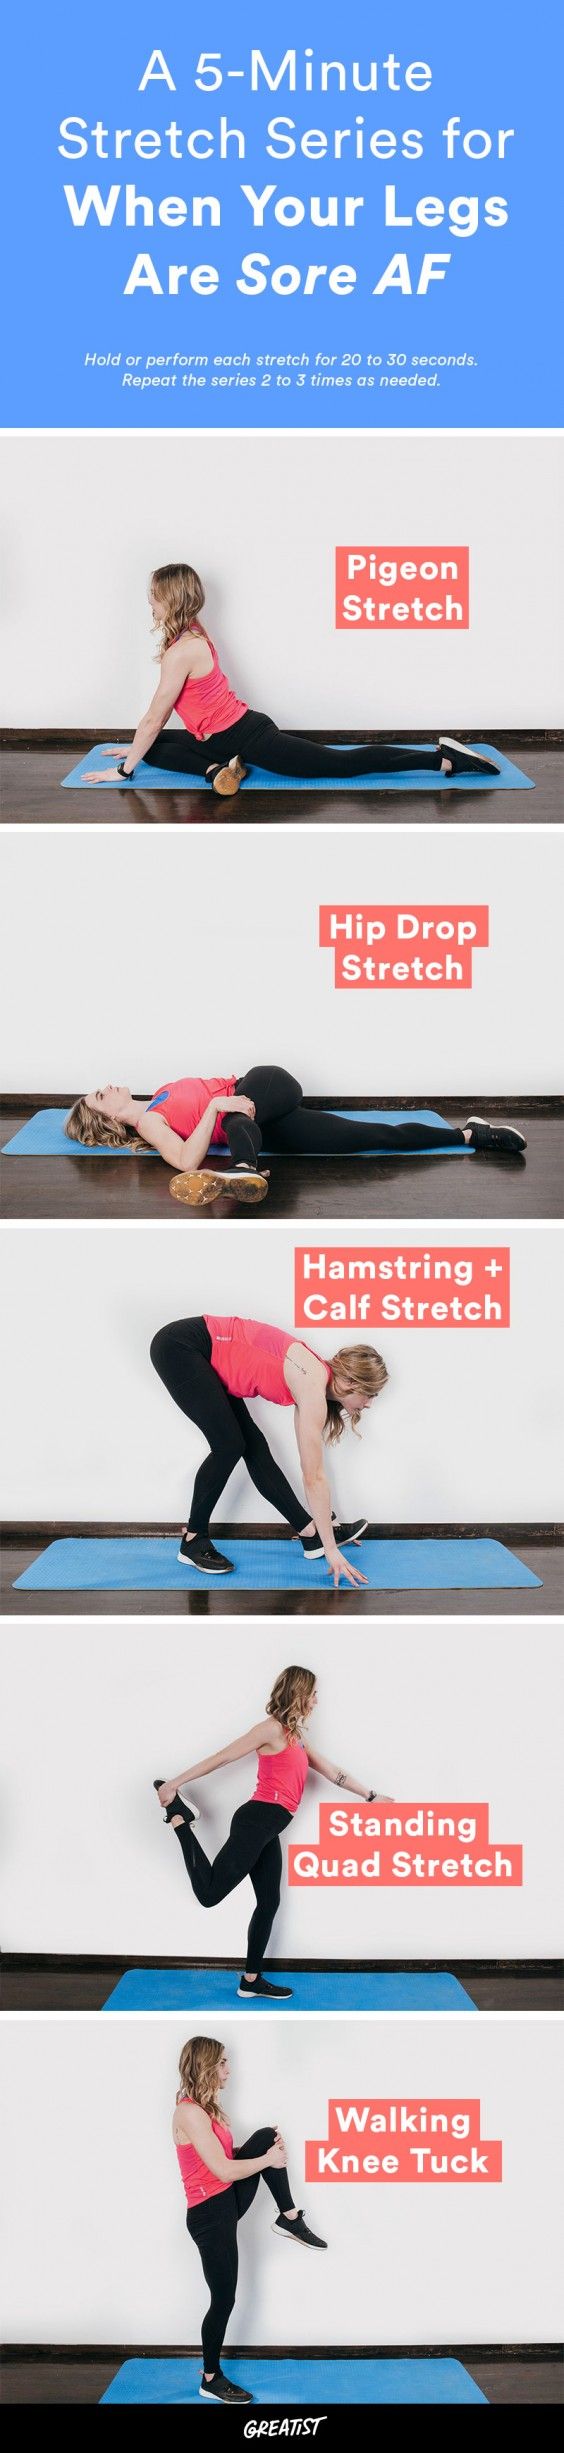 Lower-Body Stretches: Warmup and Cooldown Stretches for Your Legs